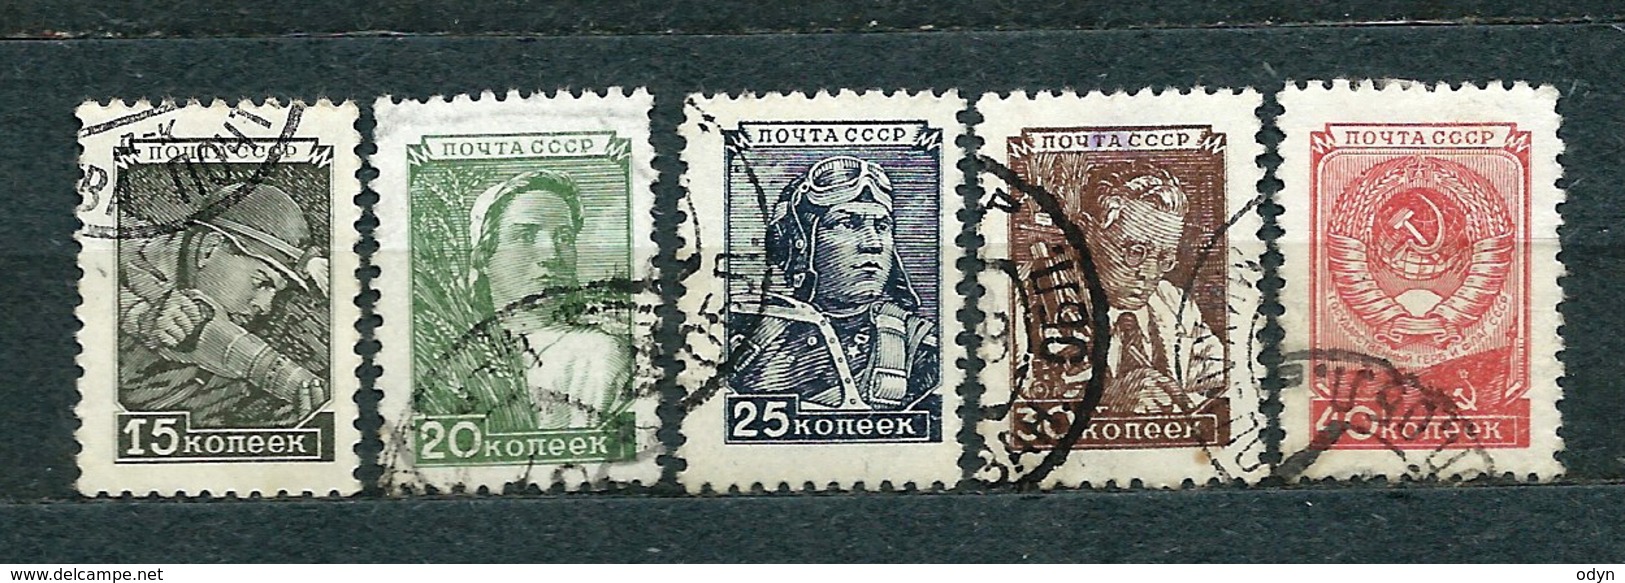 USSR, 1949; From Set MiNr 1331-1336, MiNr 1335 Type I, Missing 1336, Used (2) - Usati